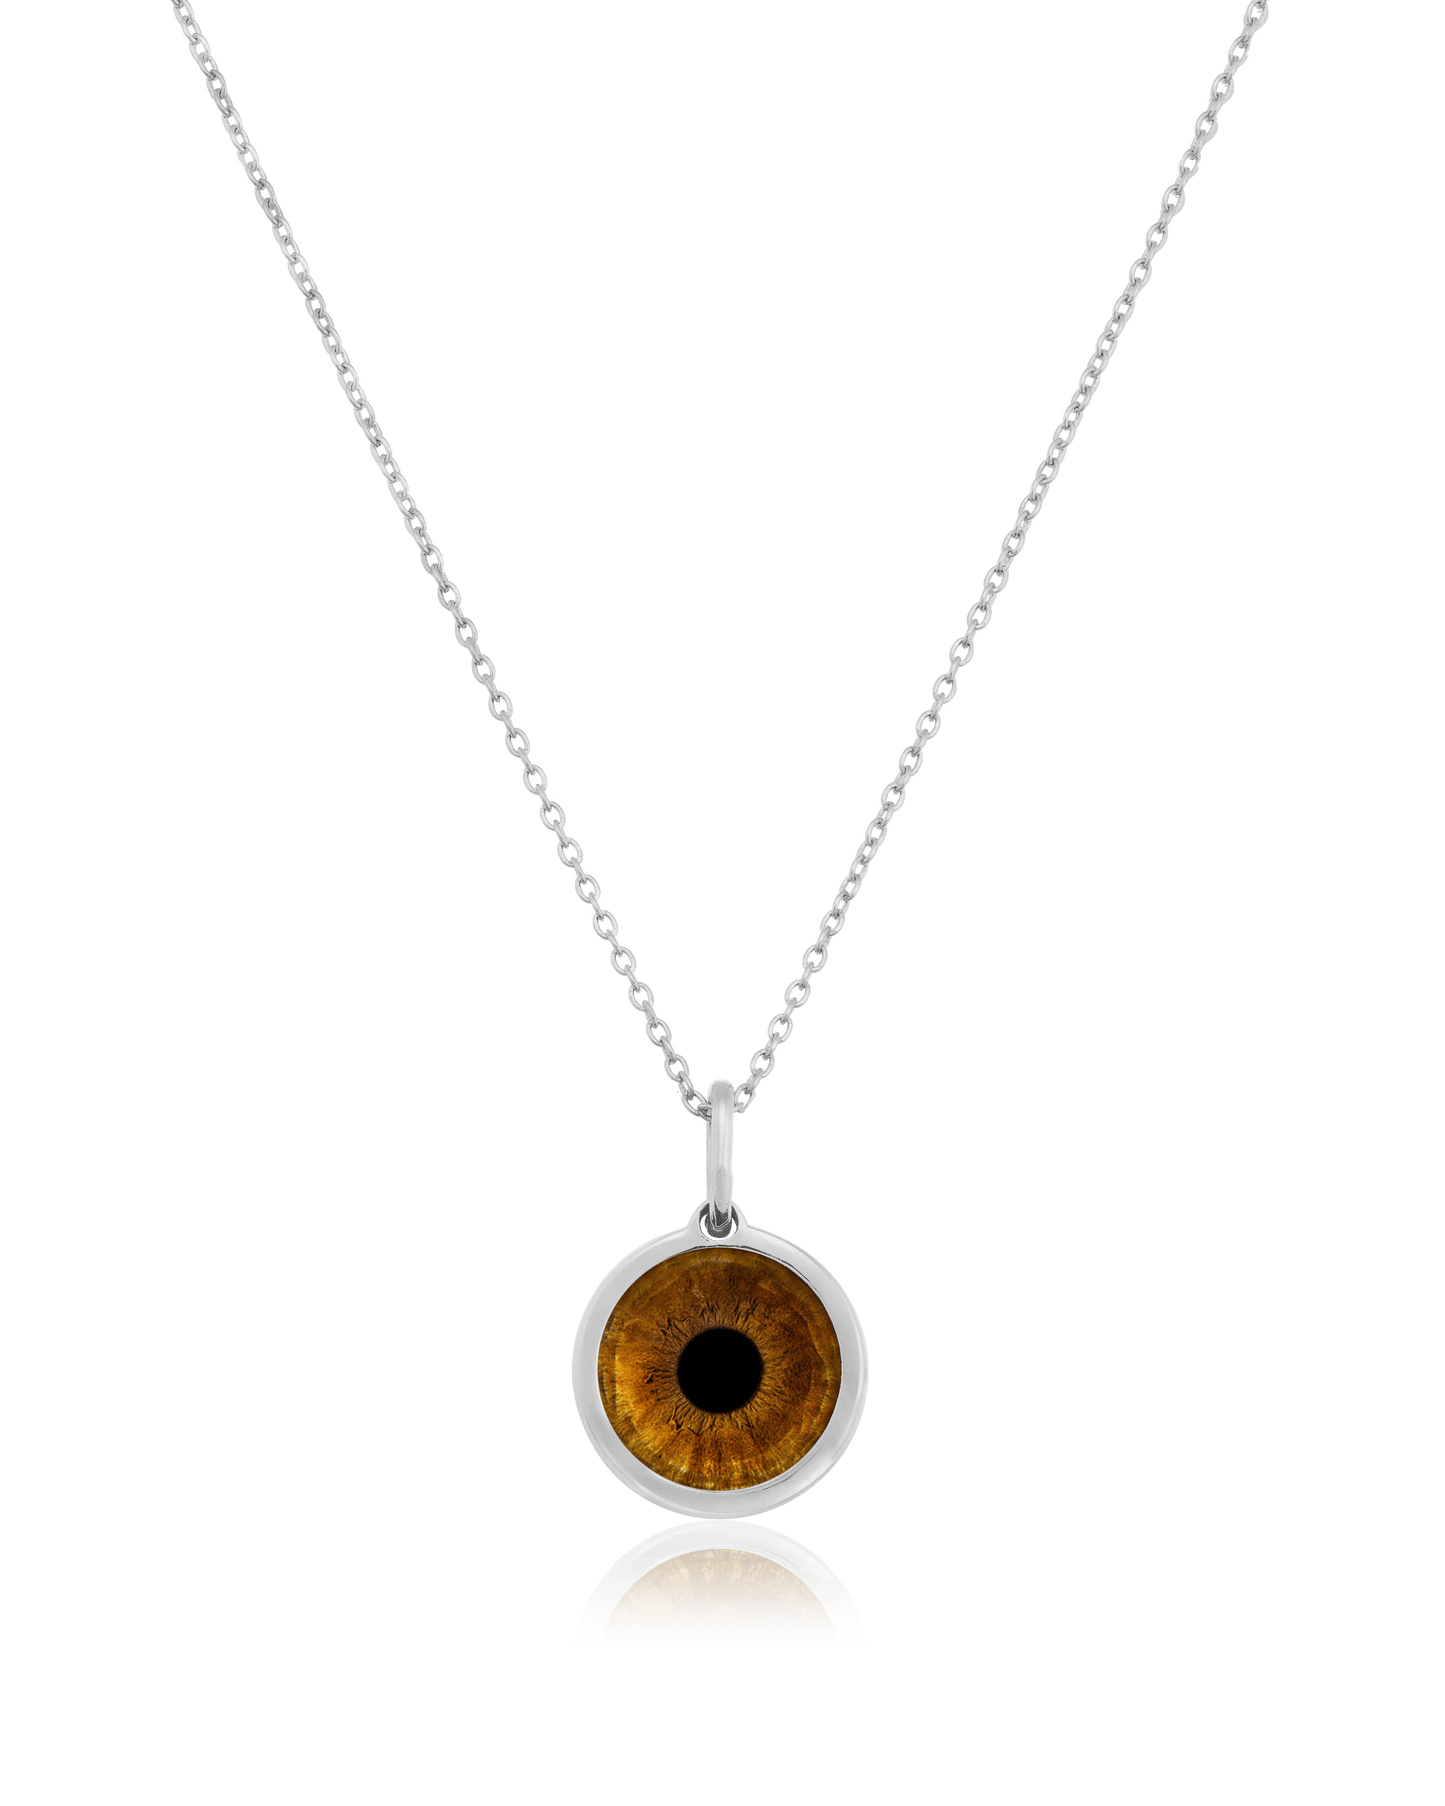 COLLIER MAGAL MY IRIS™ - Argent 925 Necklaces magal-dev 